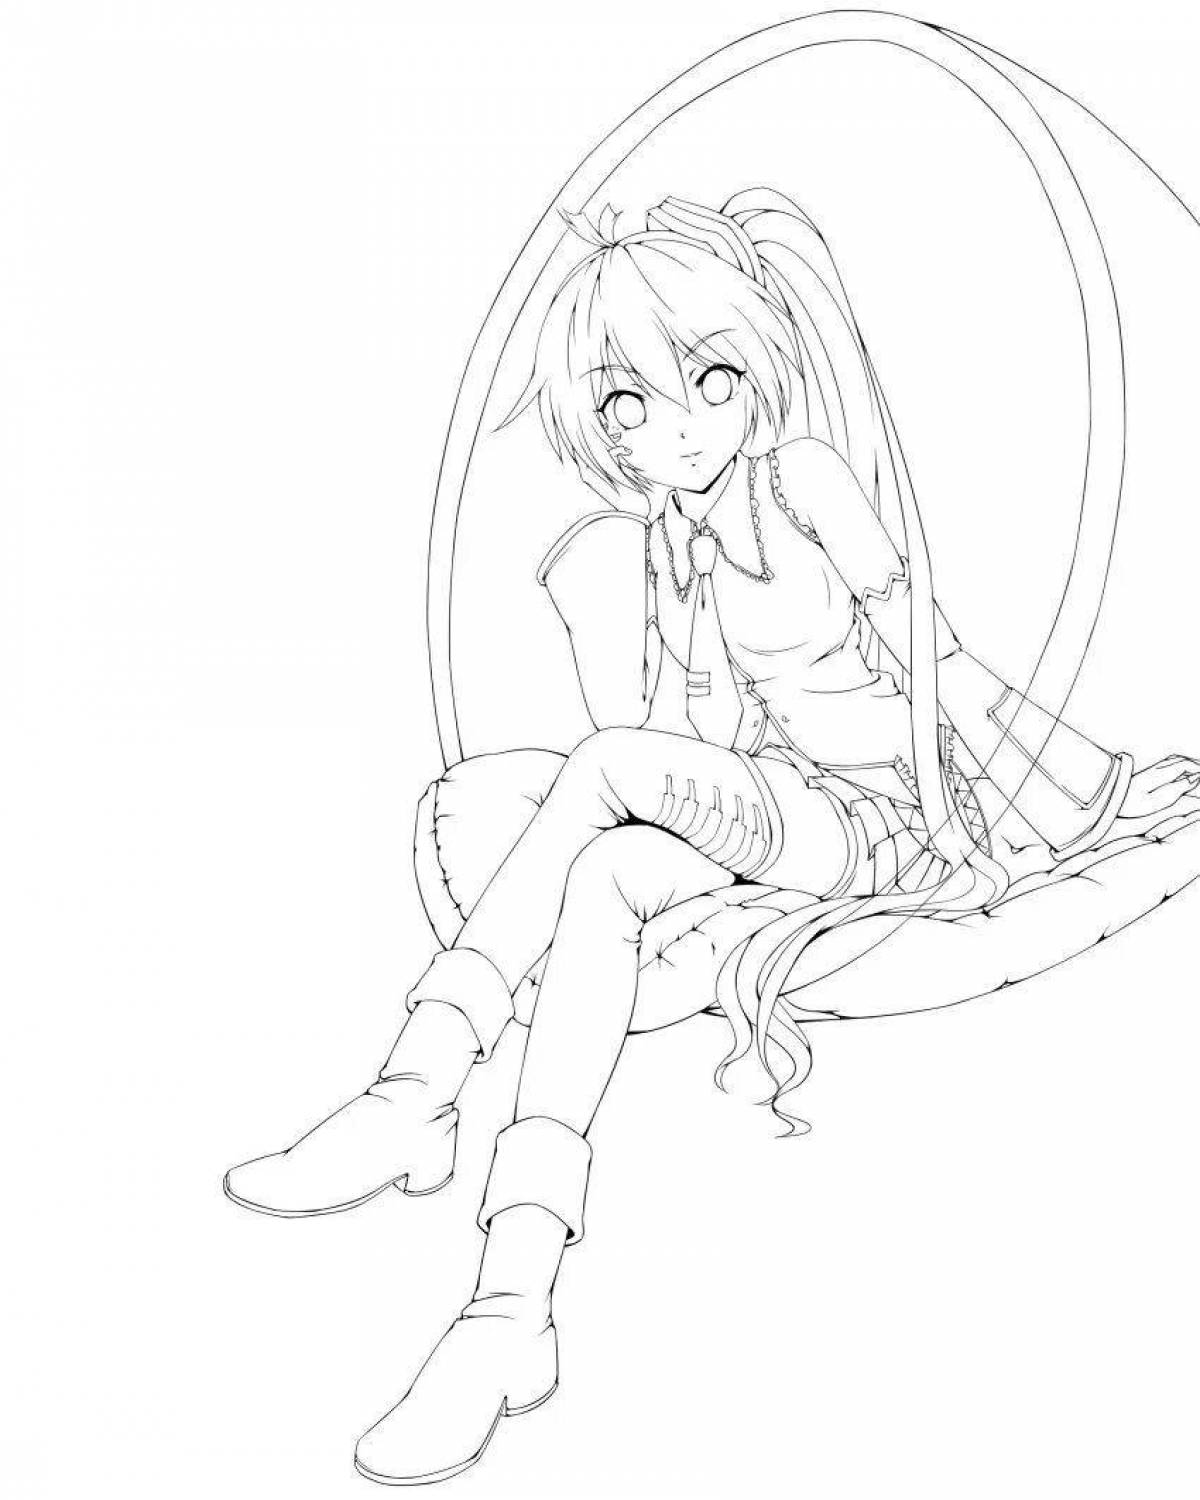 Colouring funny Vocaloid